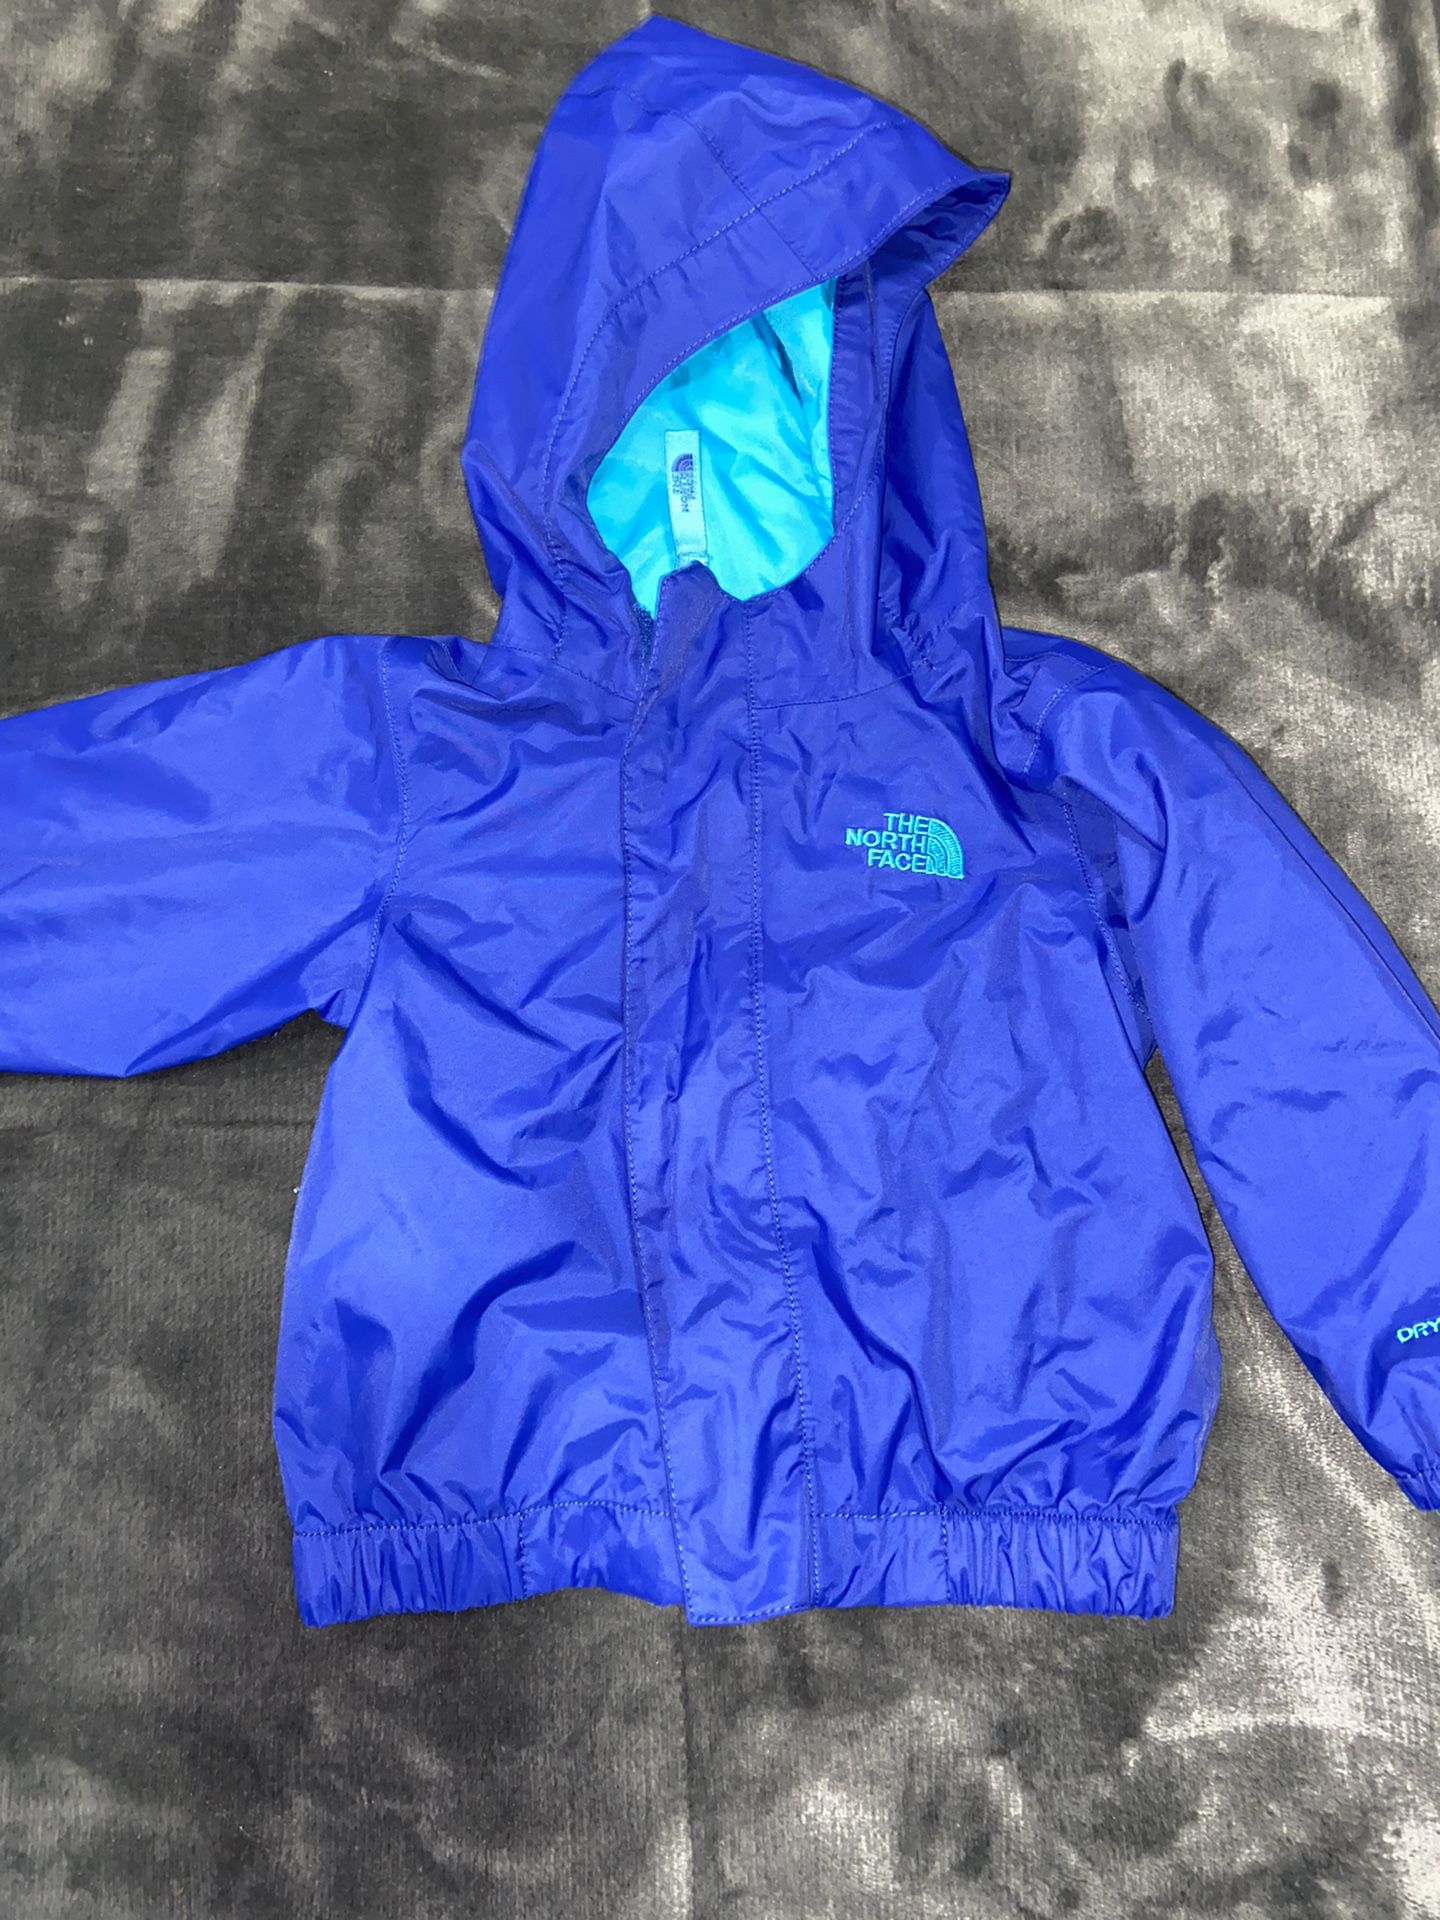 The North Face “dryvent” for babies